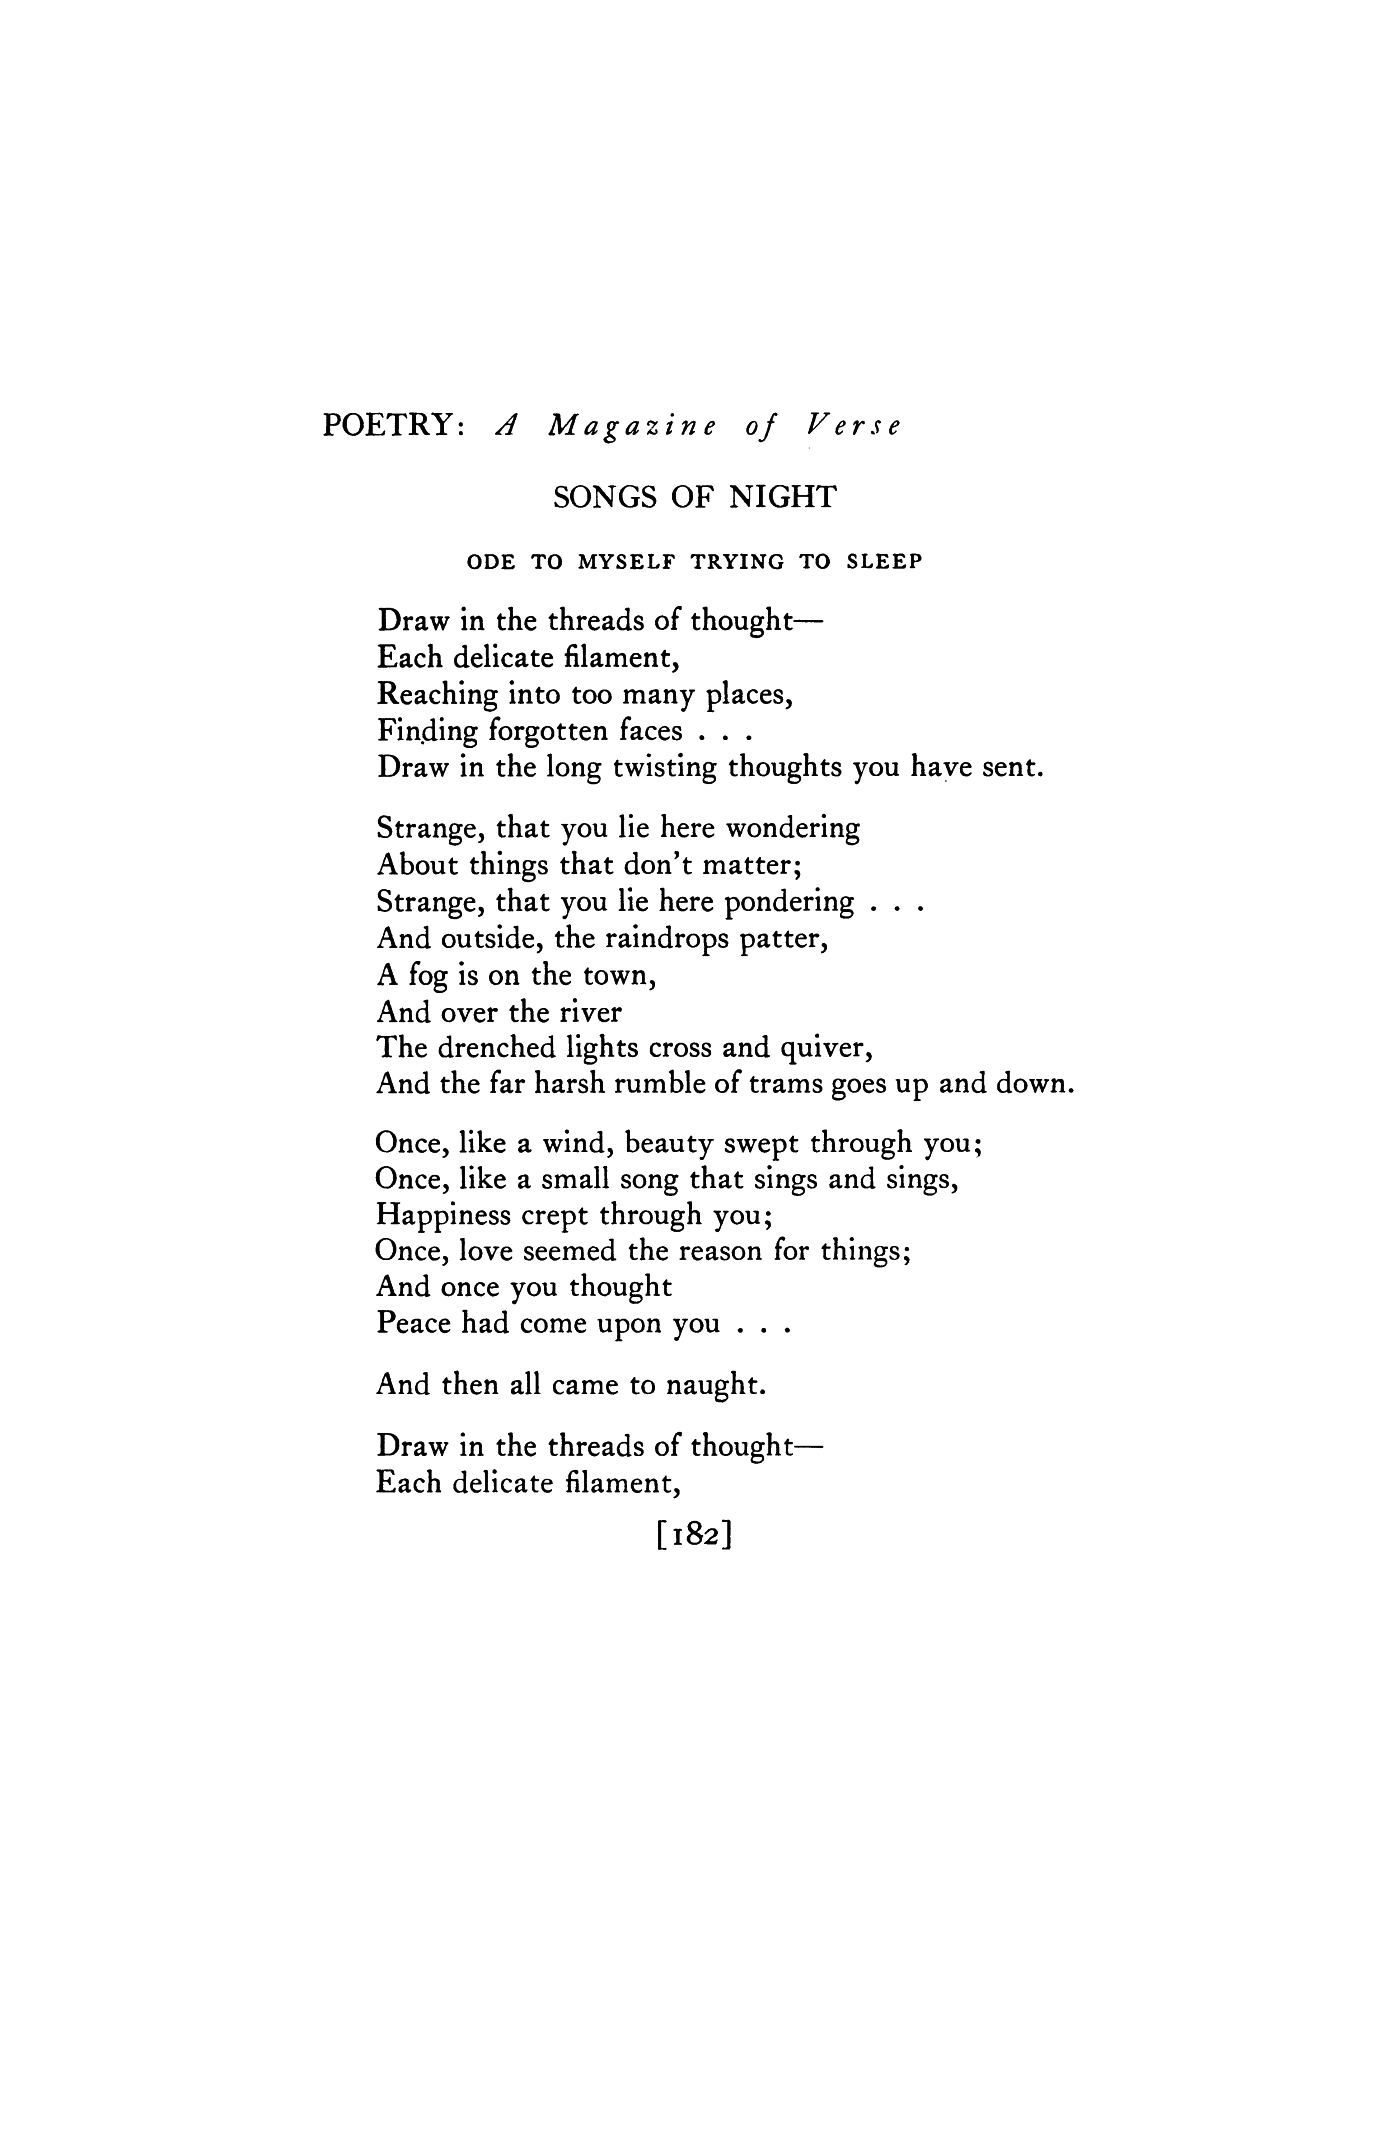 ode poems about love